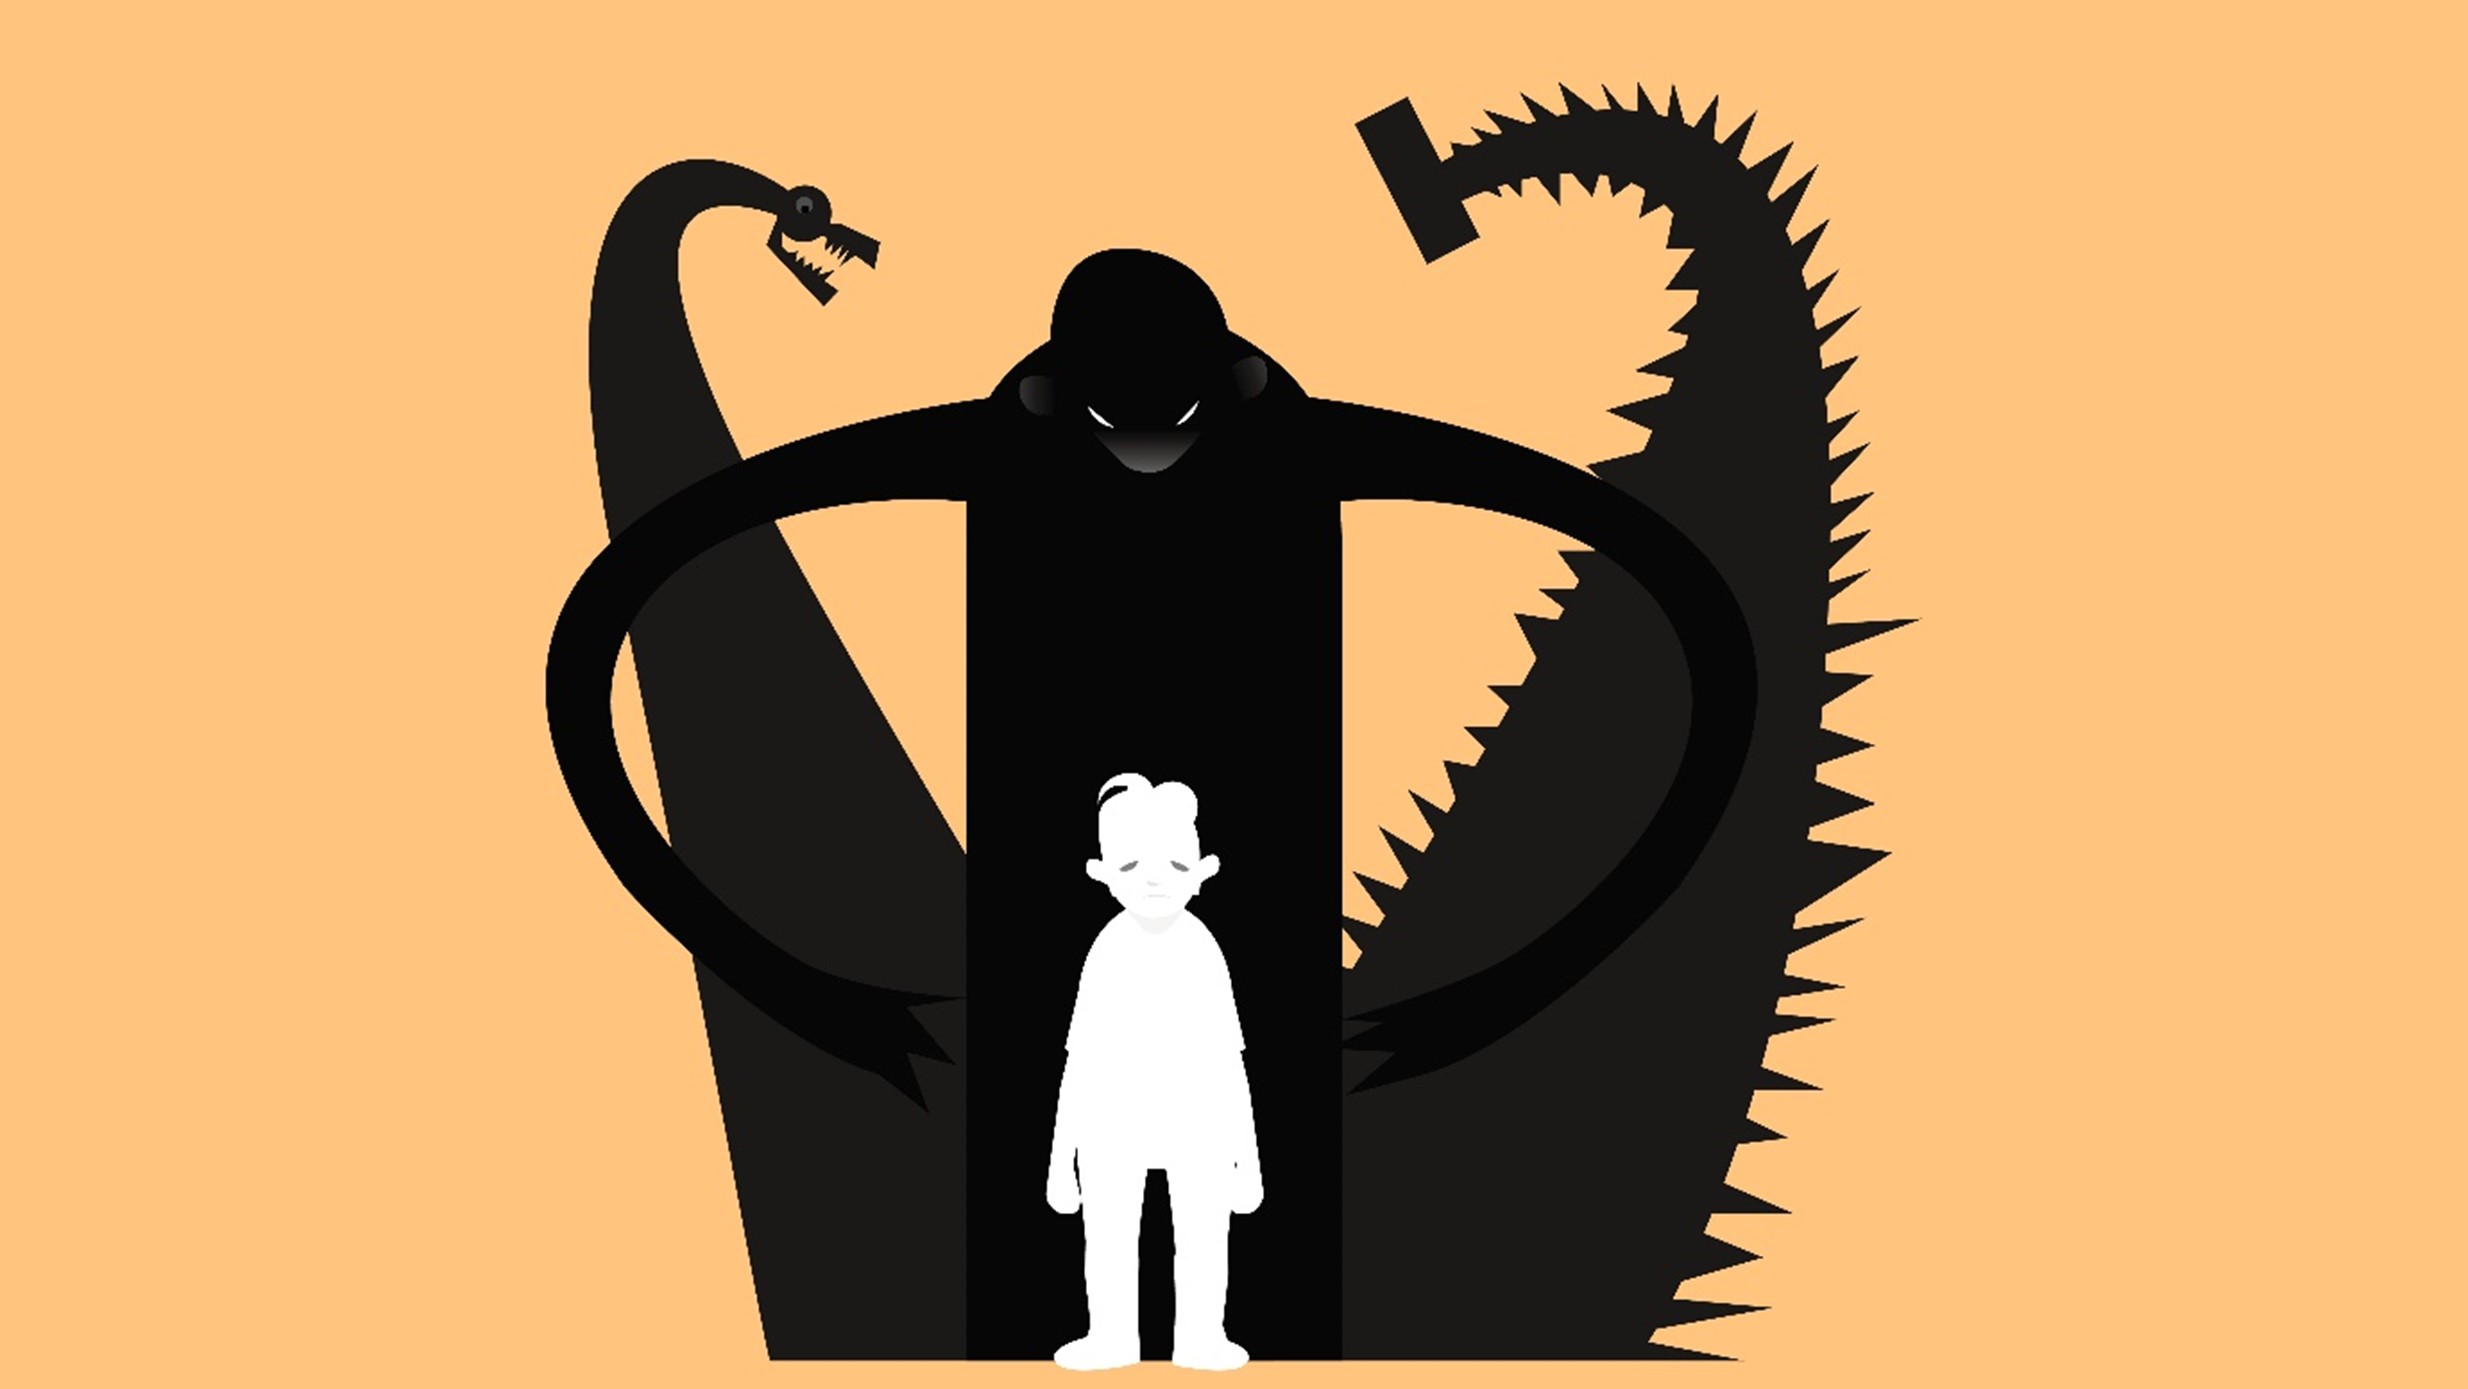 Illustration with an orange background showing a small child with a dark monster behind them looking over them